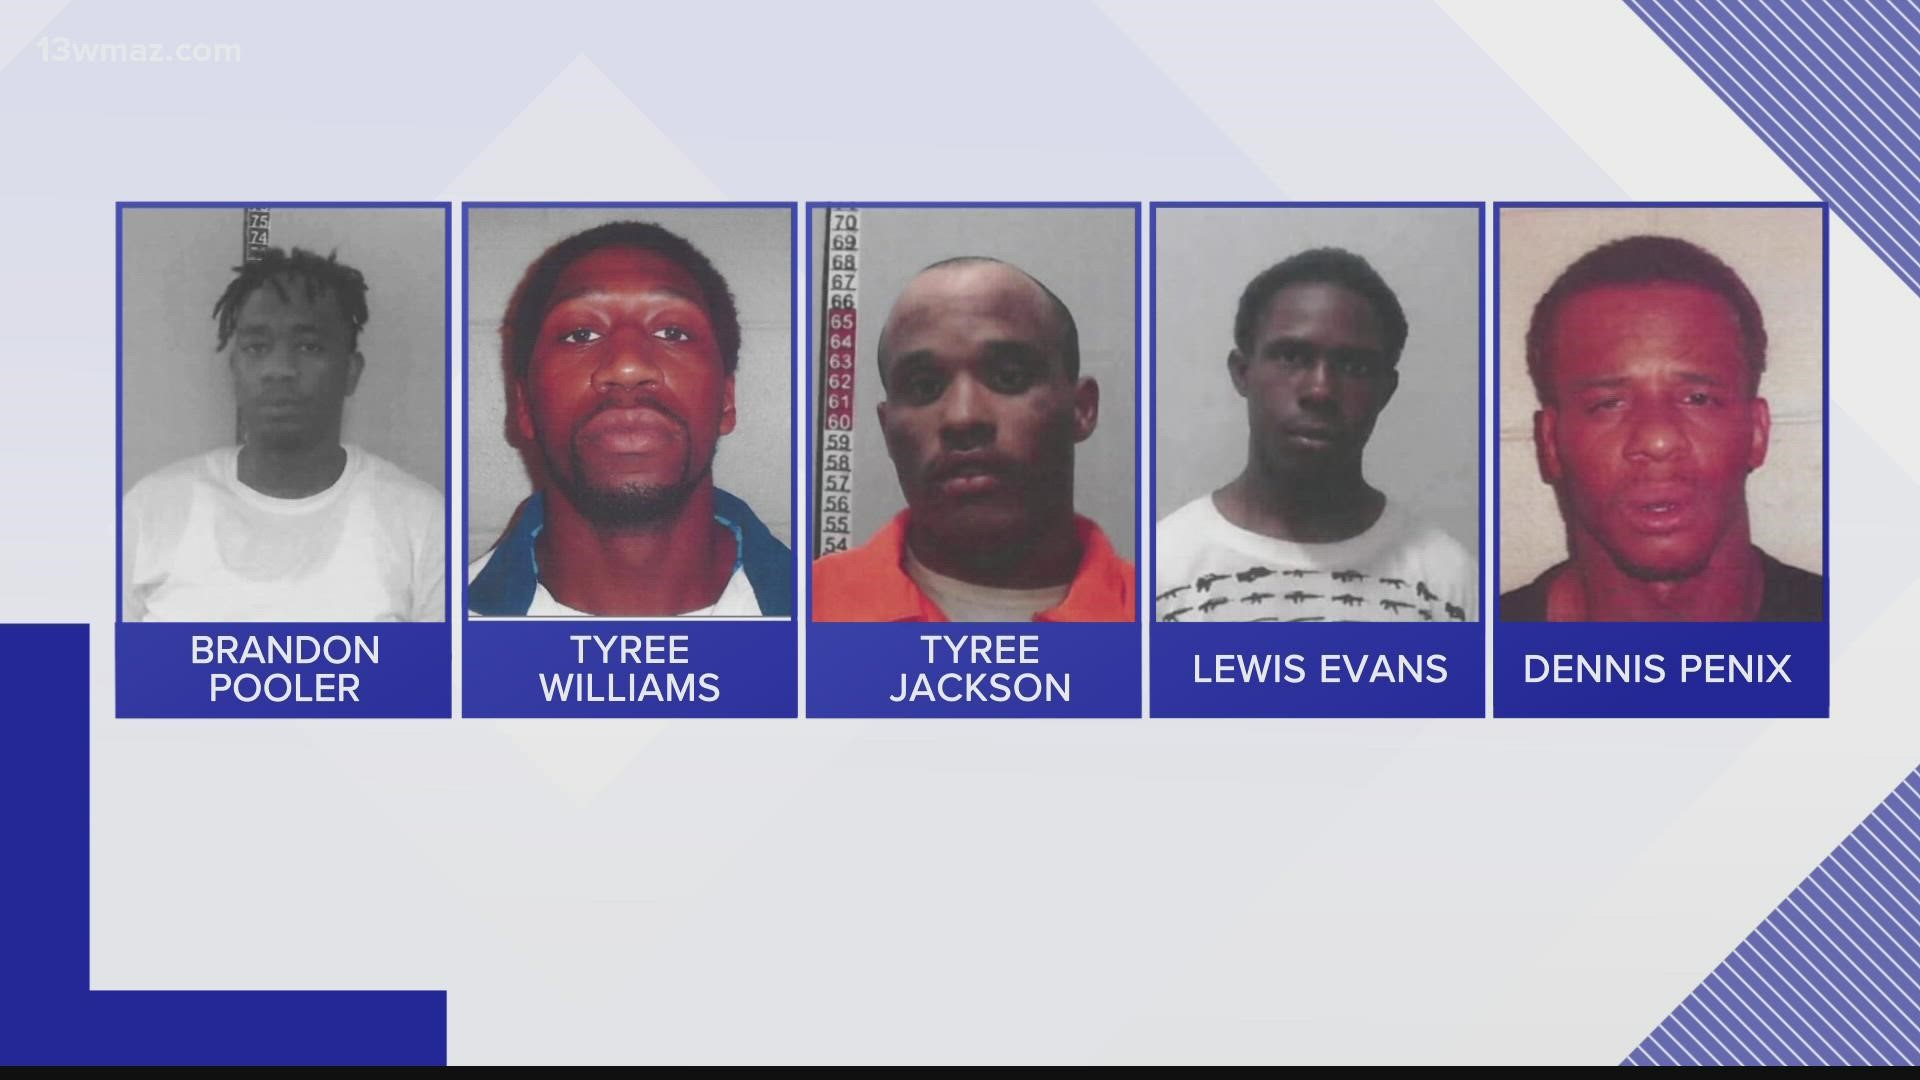 The five inmates are said to be extremely dangerous, and escaped in a stolen white vehicle around 11 p.m. Friday.